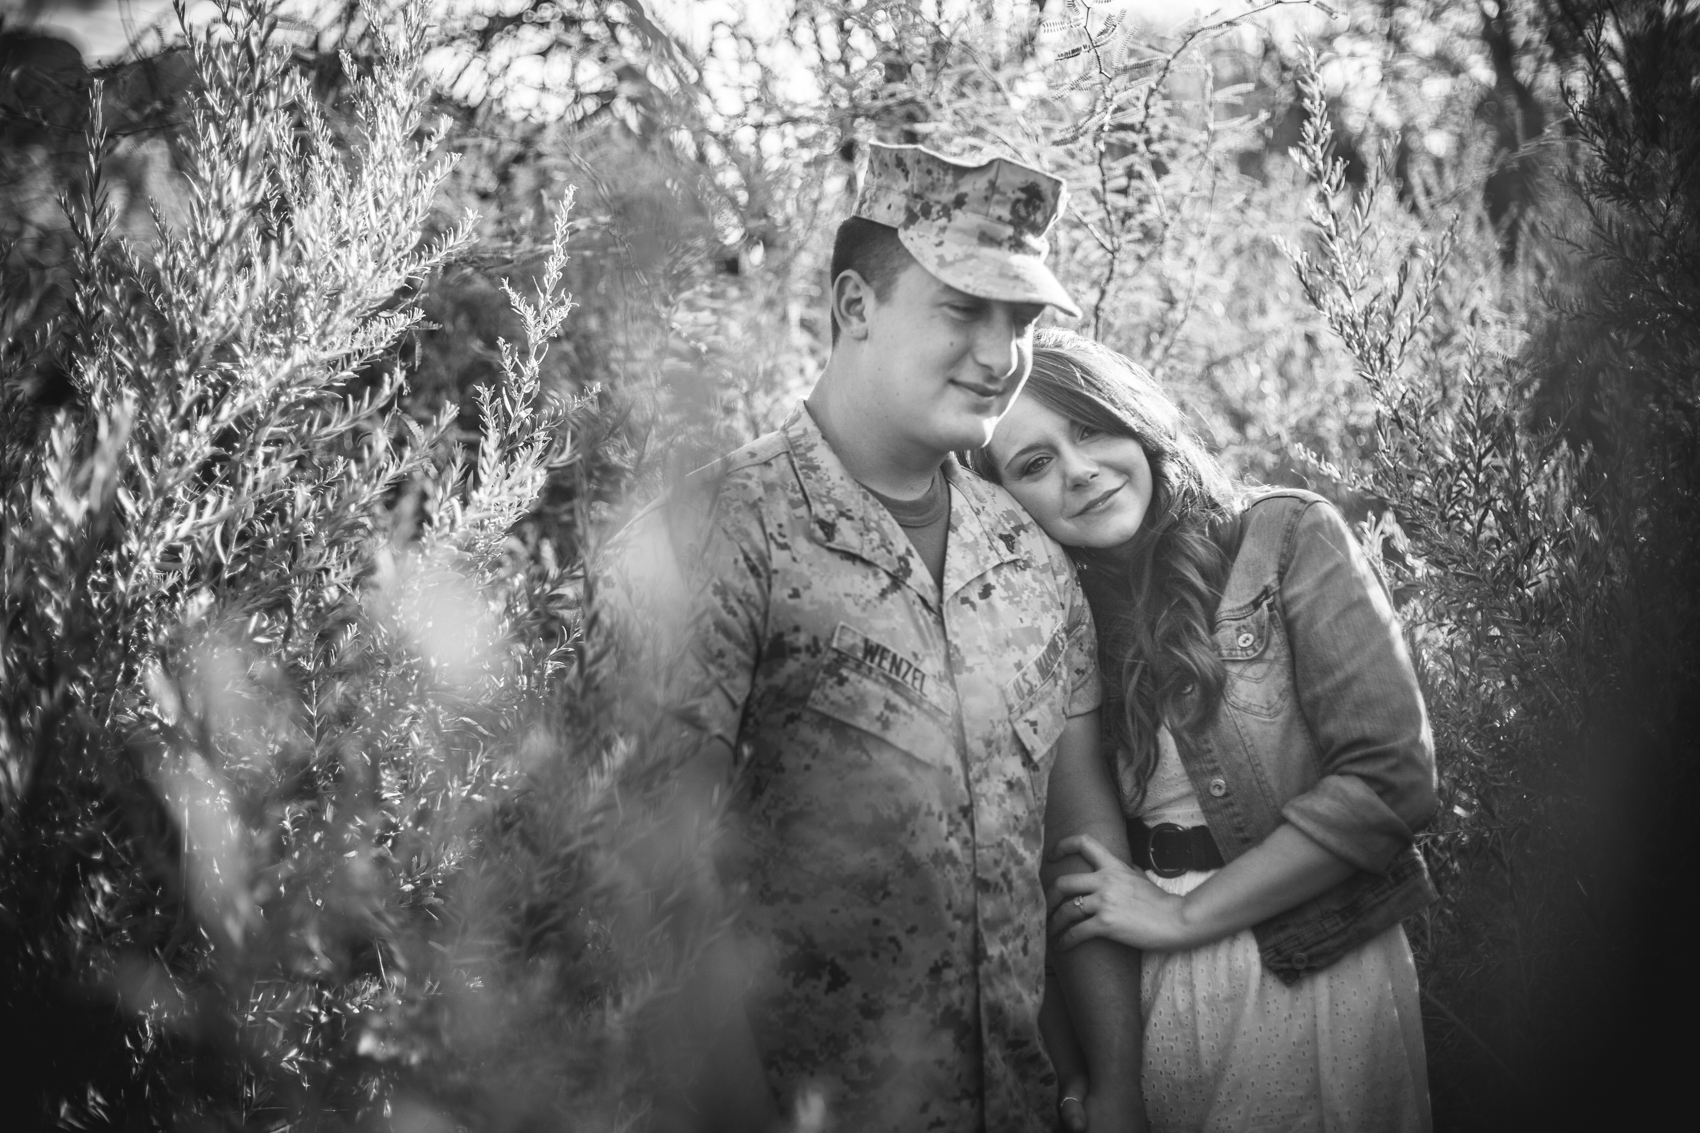 Military couple in desert foliage